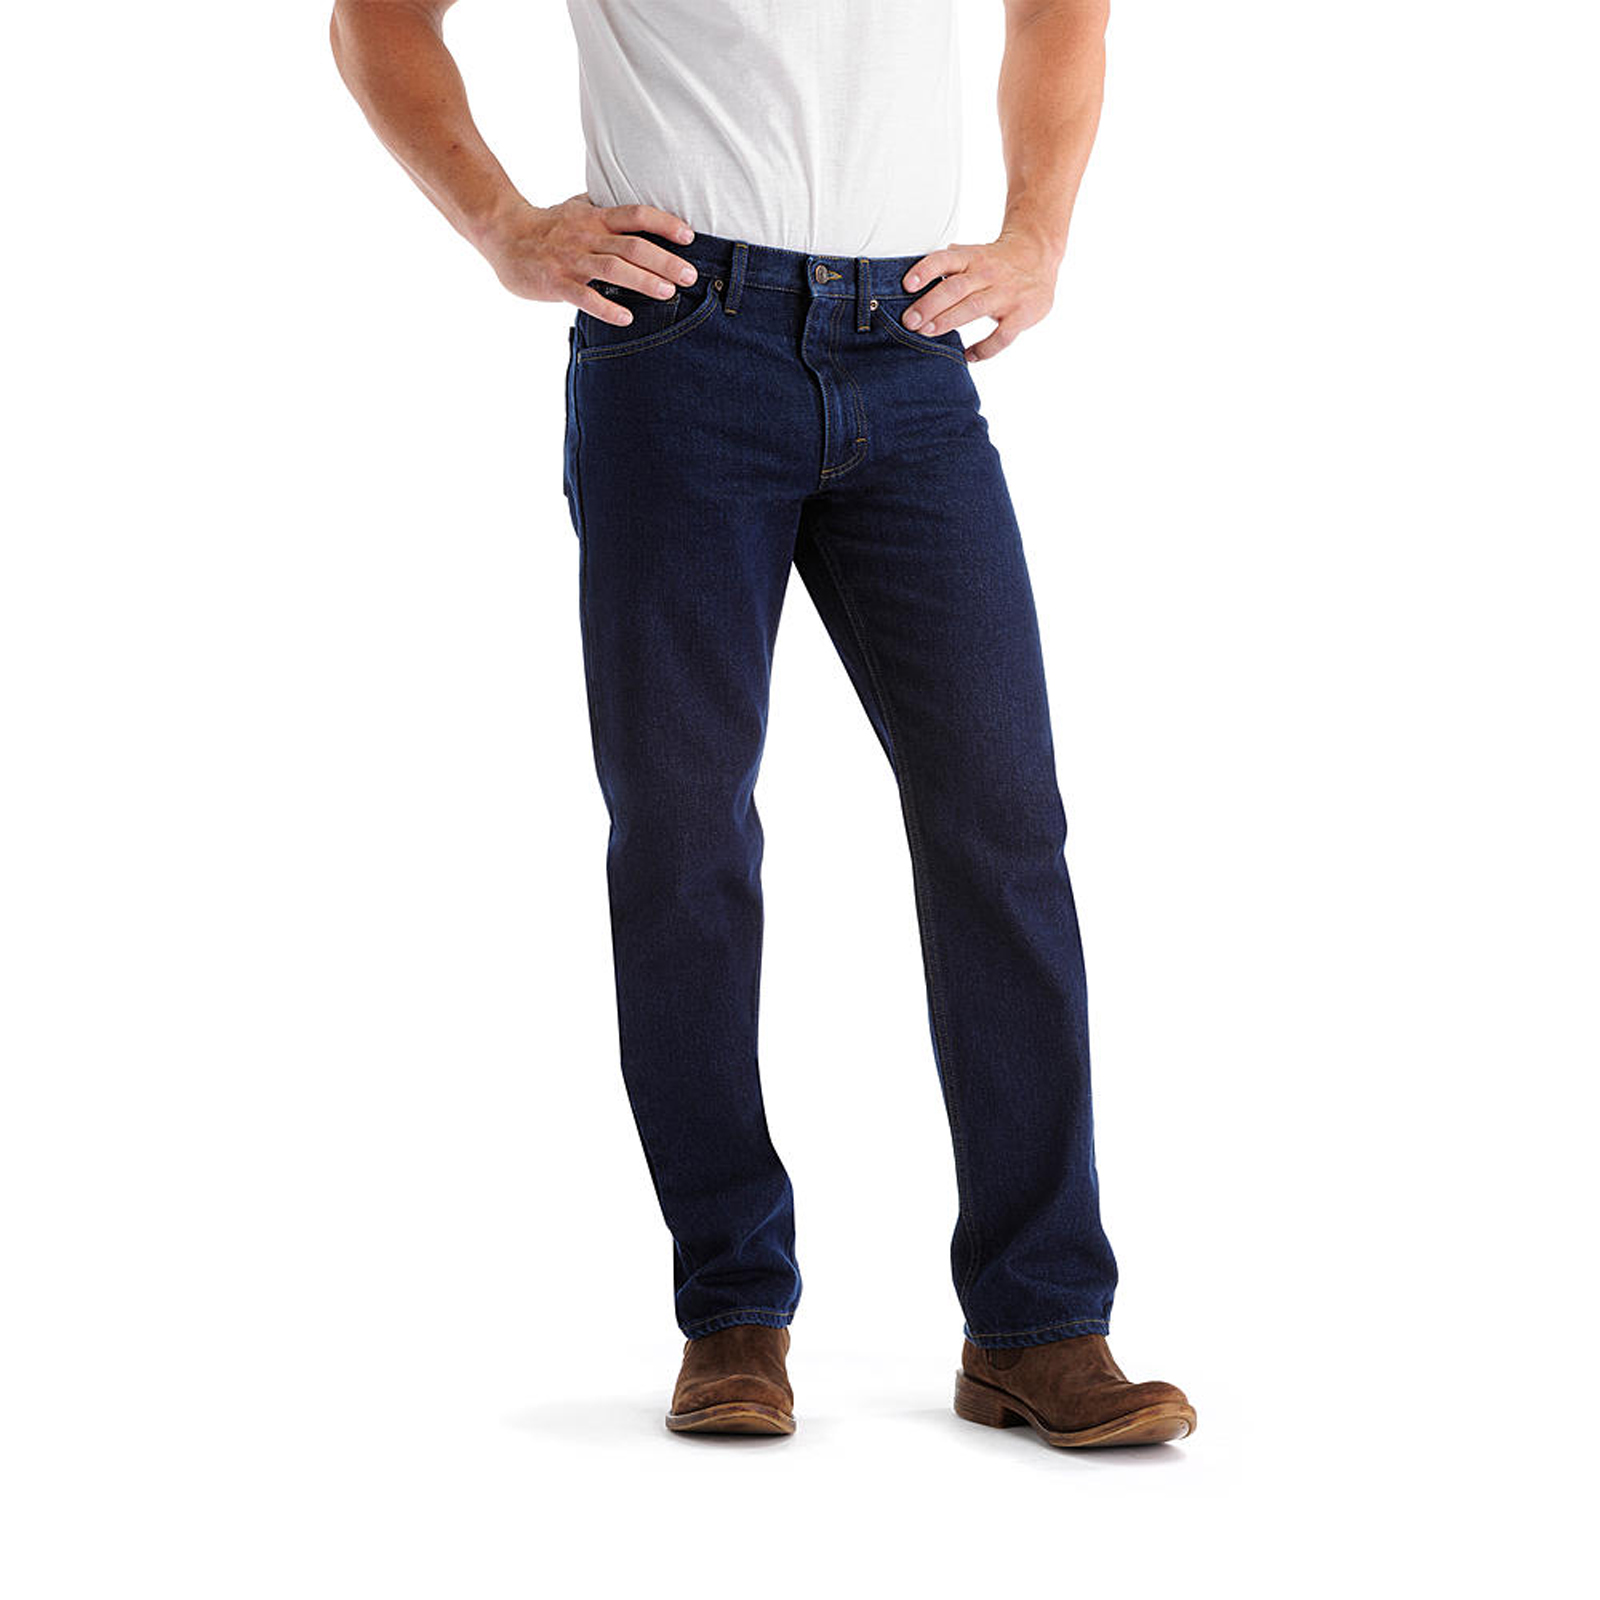 LEE Men's Relaxed Fit Jean